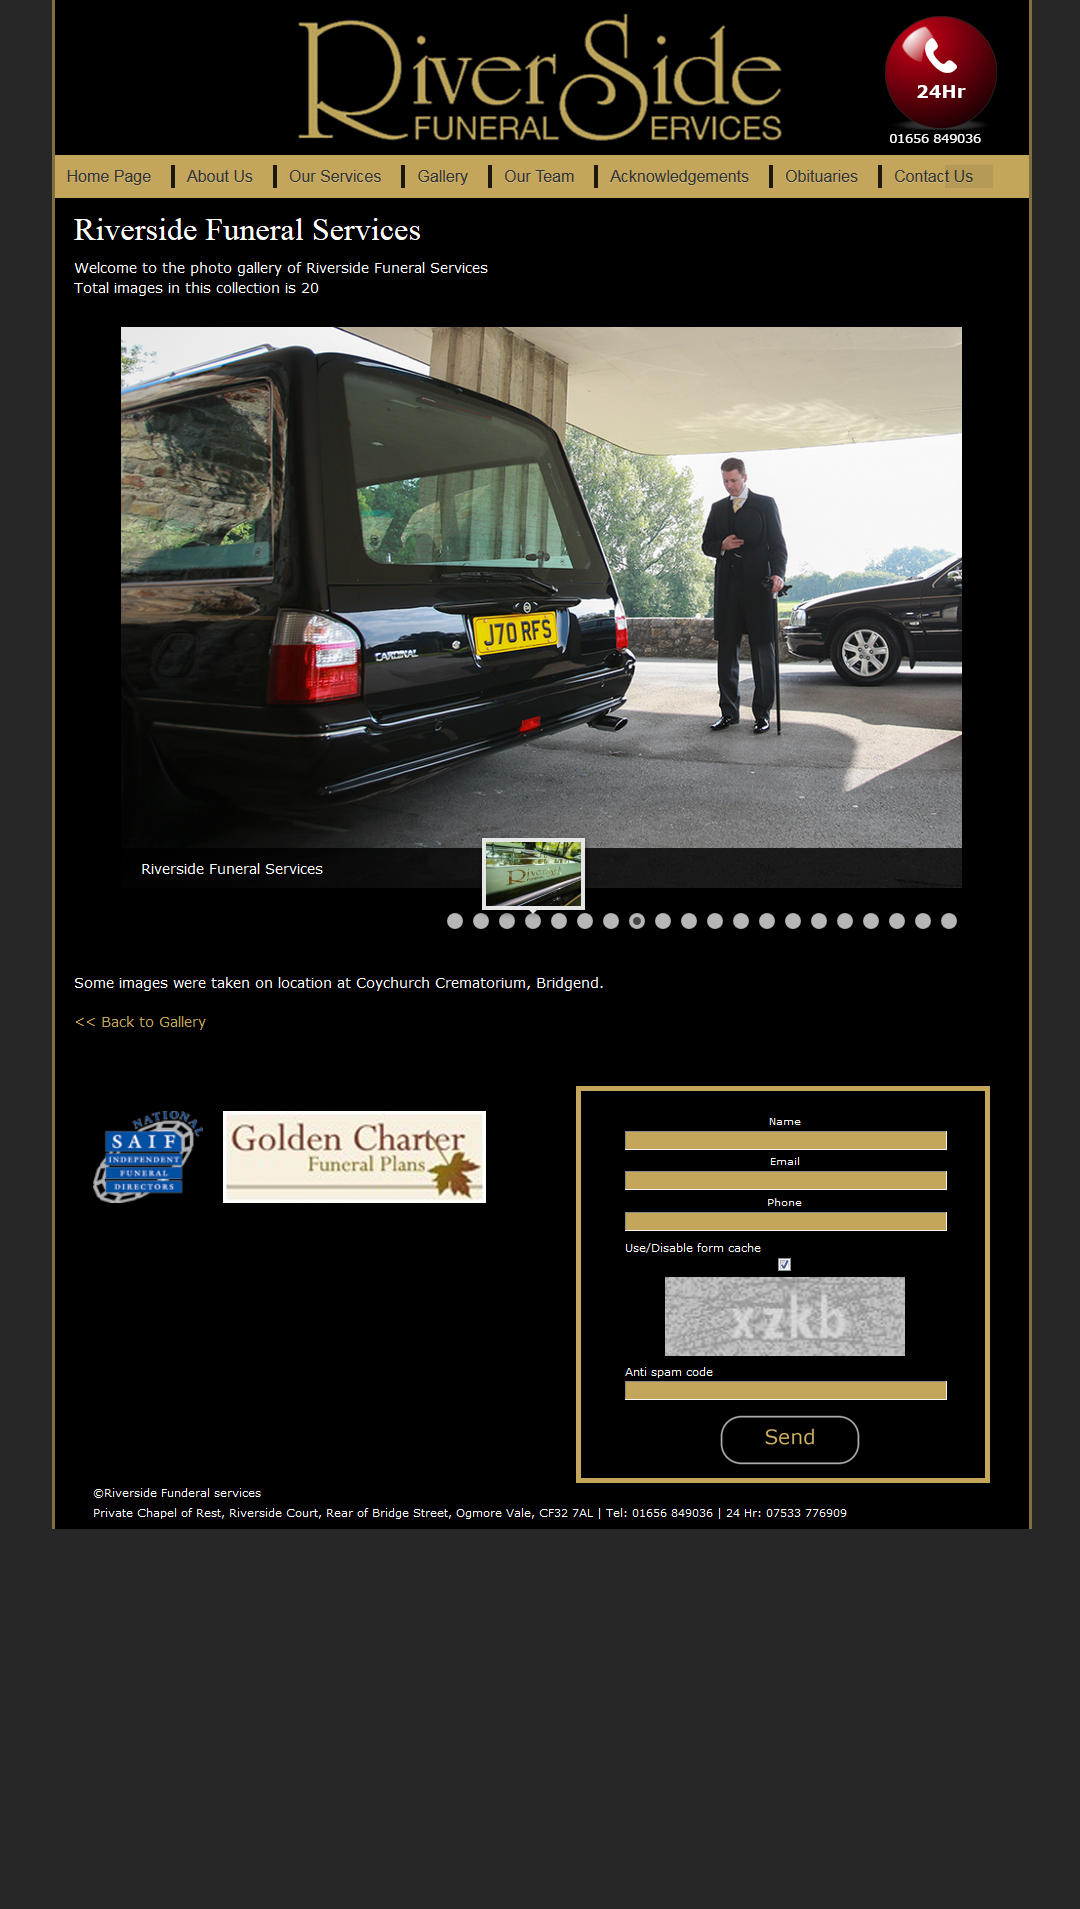 An image from Riverside Funeral Services Website